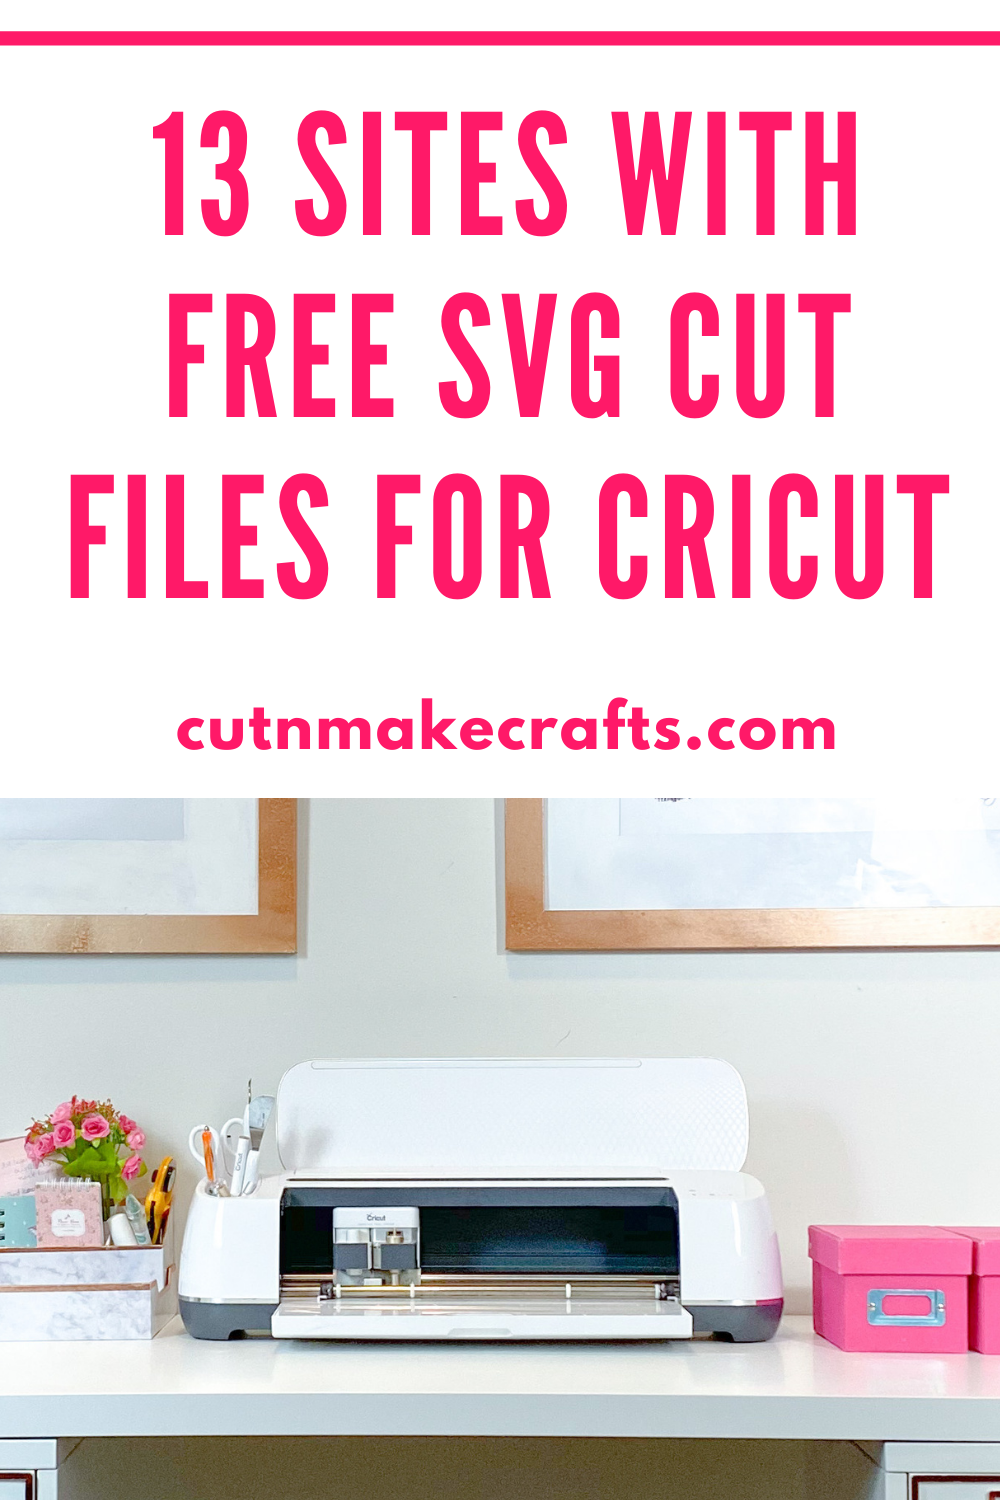 13 Sites With Free Svg Cut Files For Cricut Cut N Make Crafts